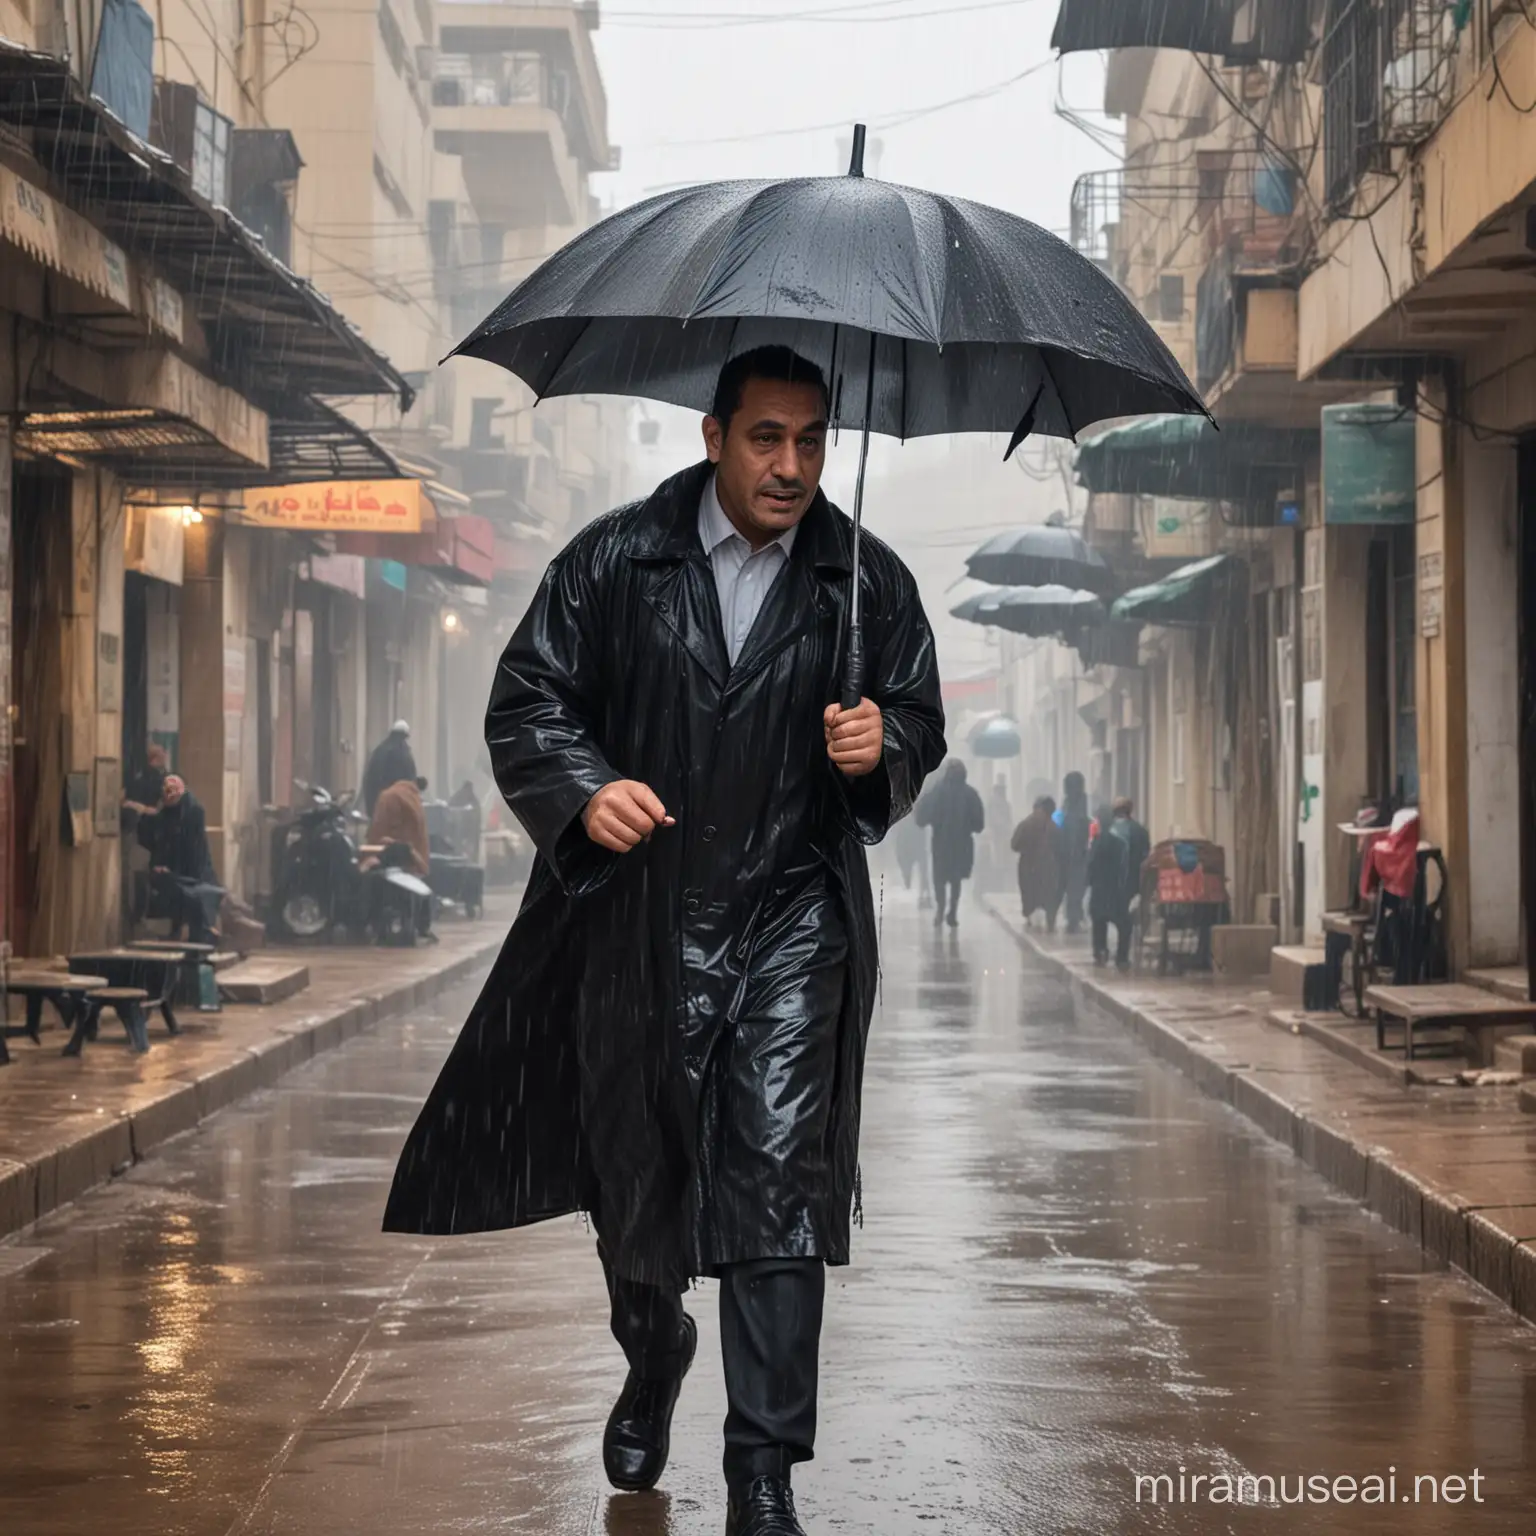 An Egyptian Butcher is running under the rain in winter holding an umbrella. he's wearing galabiya and a black jacket